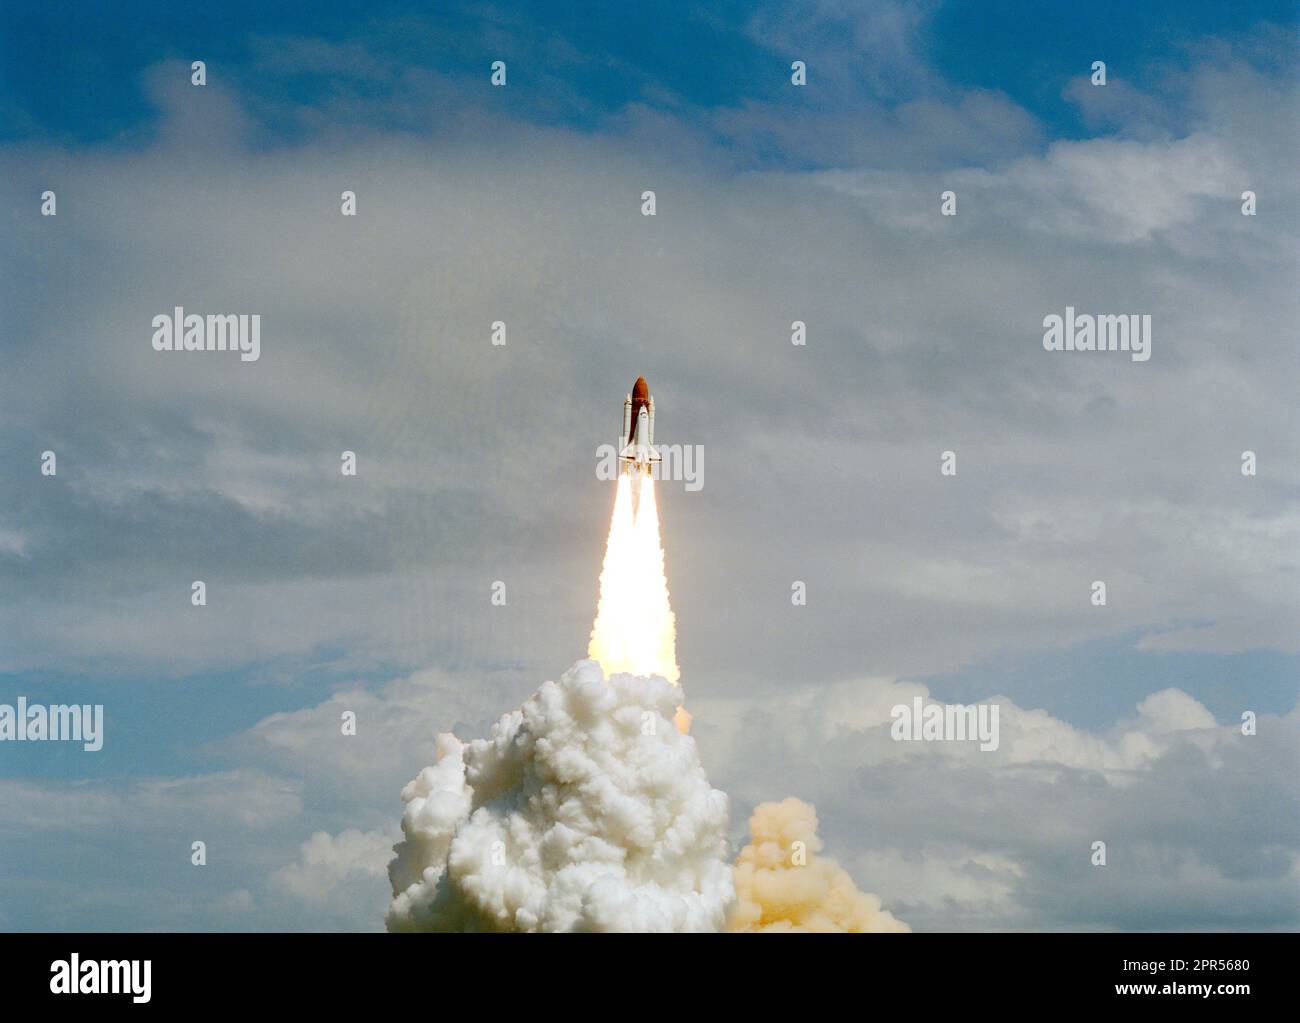 STS-26 Discovery, Orbiter Vehicle (OV) 103, rises into a cloudy sky and heads for Earth orbit atop the external tank (ET) as exhaust plumes billow from the two solid rocket boosters (SRBs) during liftoff from Kennedy Space Center (KSC) Launch Complex (LC) pad 39B. STS-26 marks OV-103's first flight since September 1985 and NASA's first manned mission since 51L Challenger accident, on January 28, 1986. Stock Photo